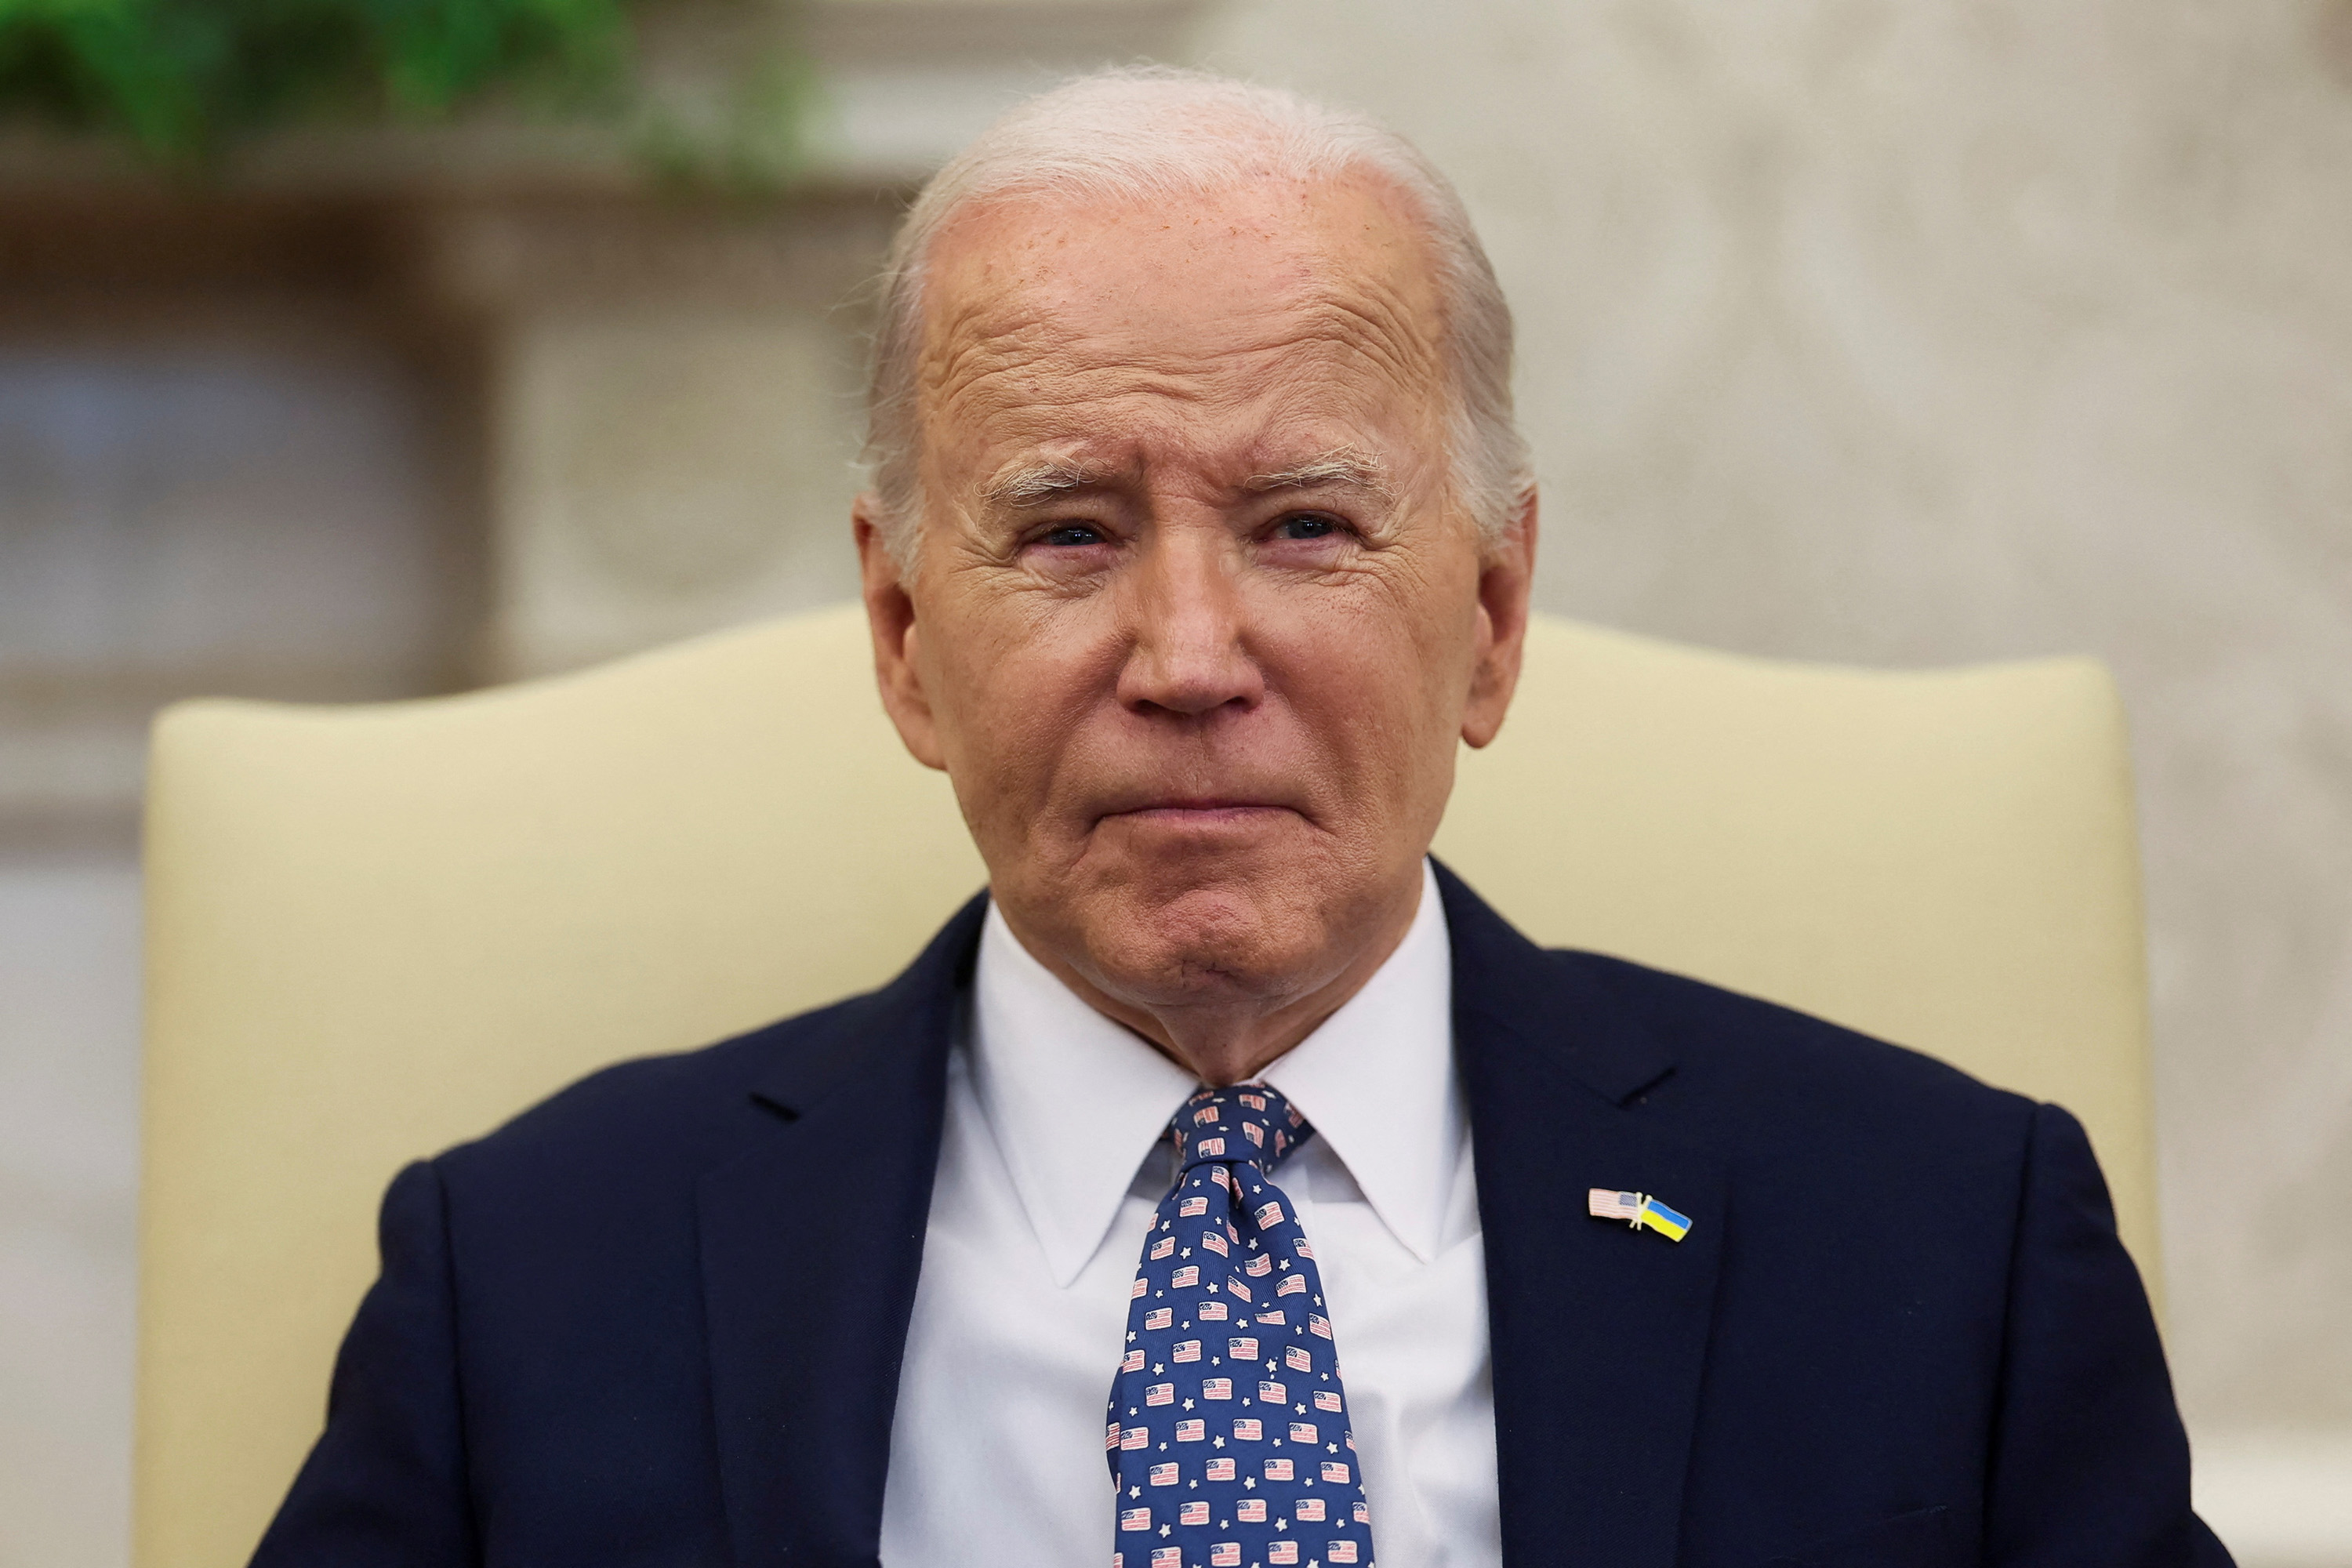 President Joe Biden looks on during a meeting at the White House in Washington, DC, on February 27.